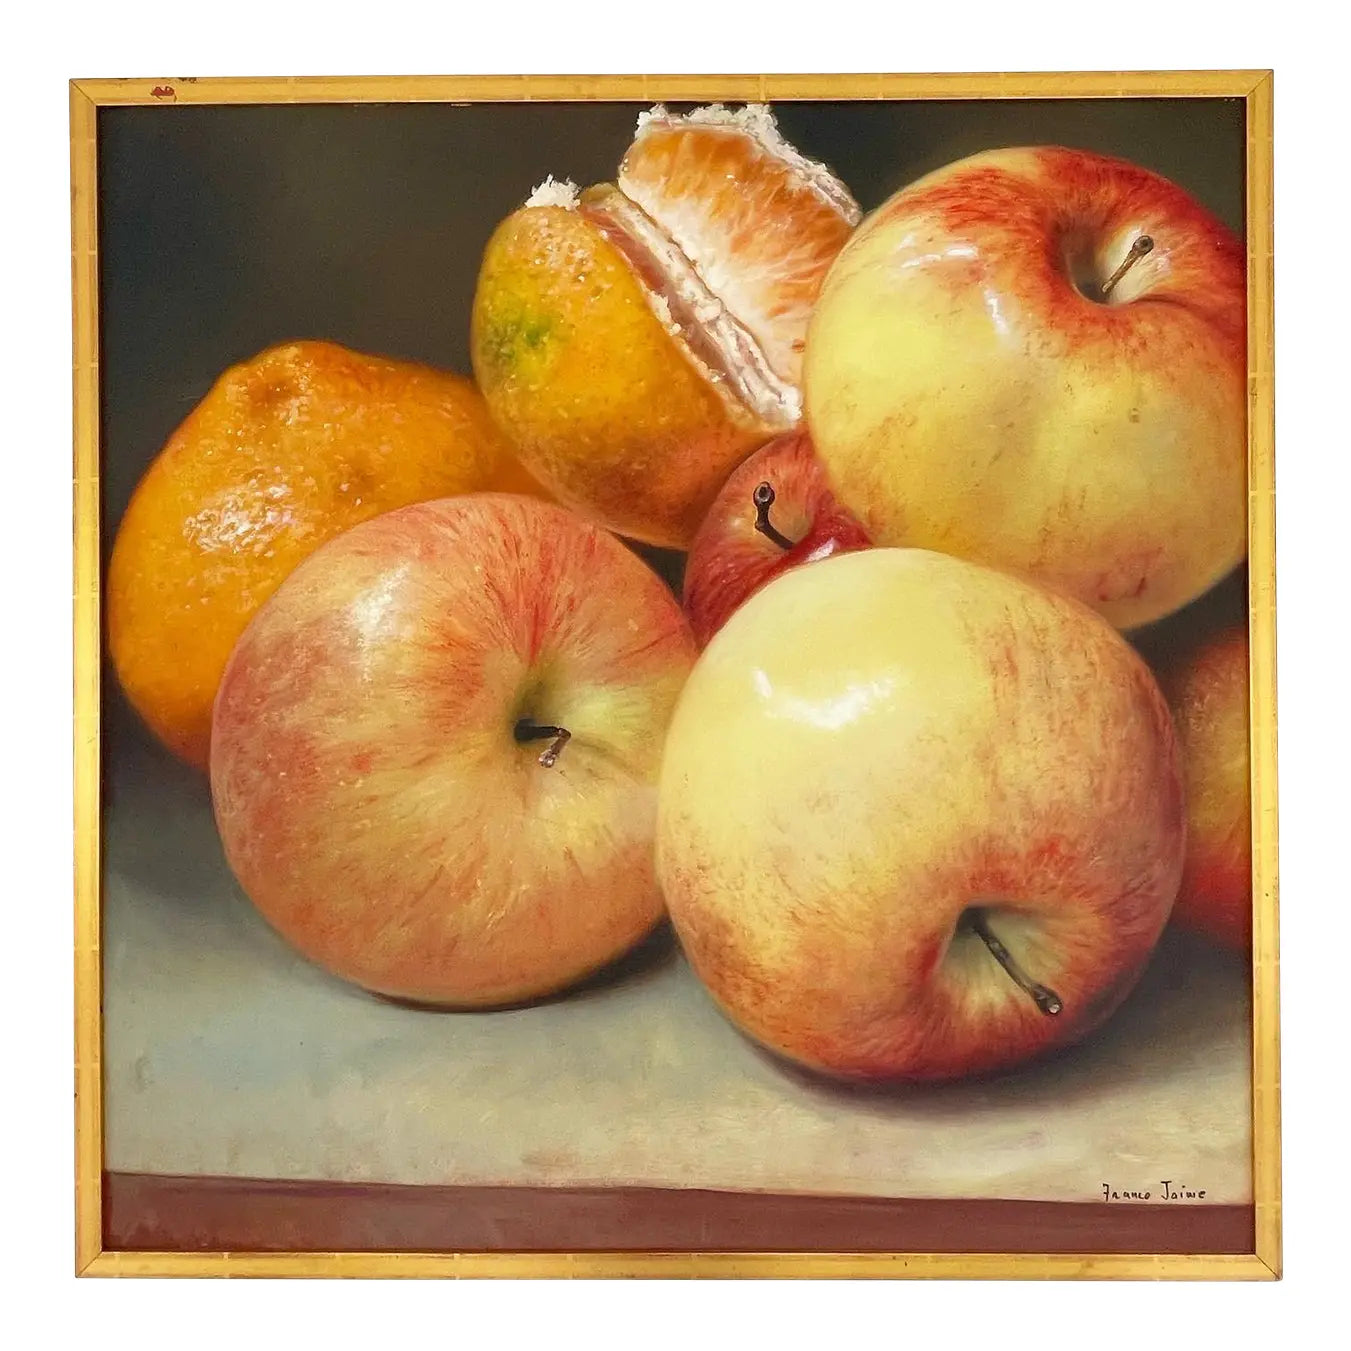 Large Ruben Franco Jaime Still Life Painting of Apples and Oranges